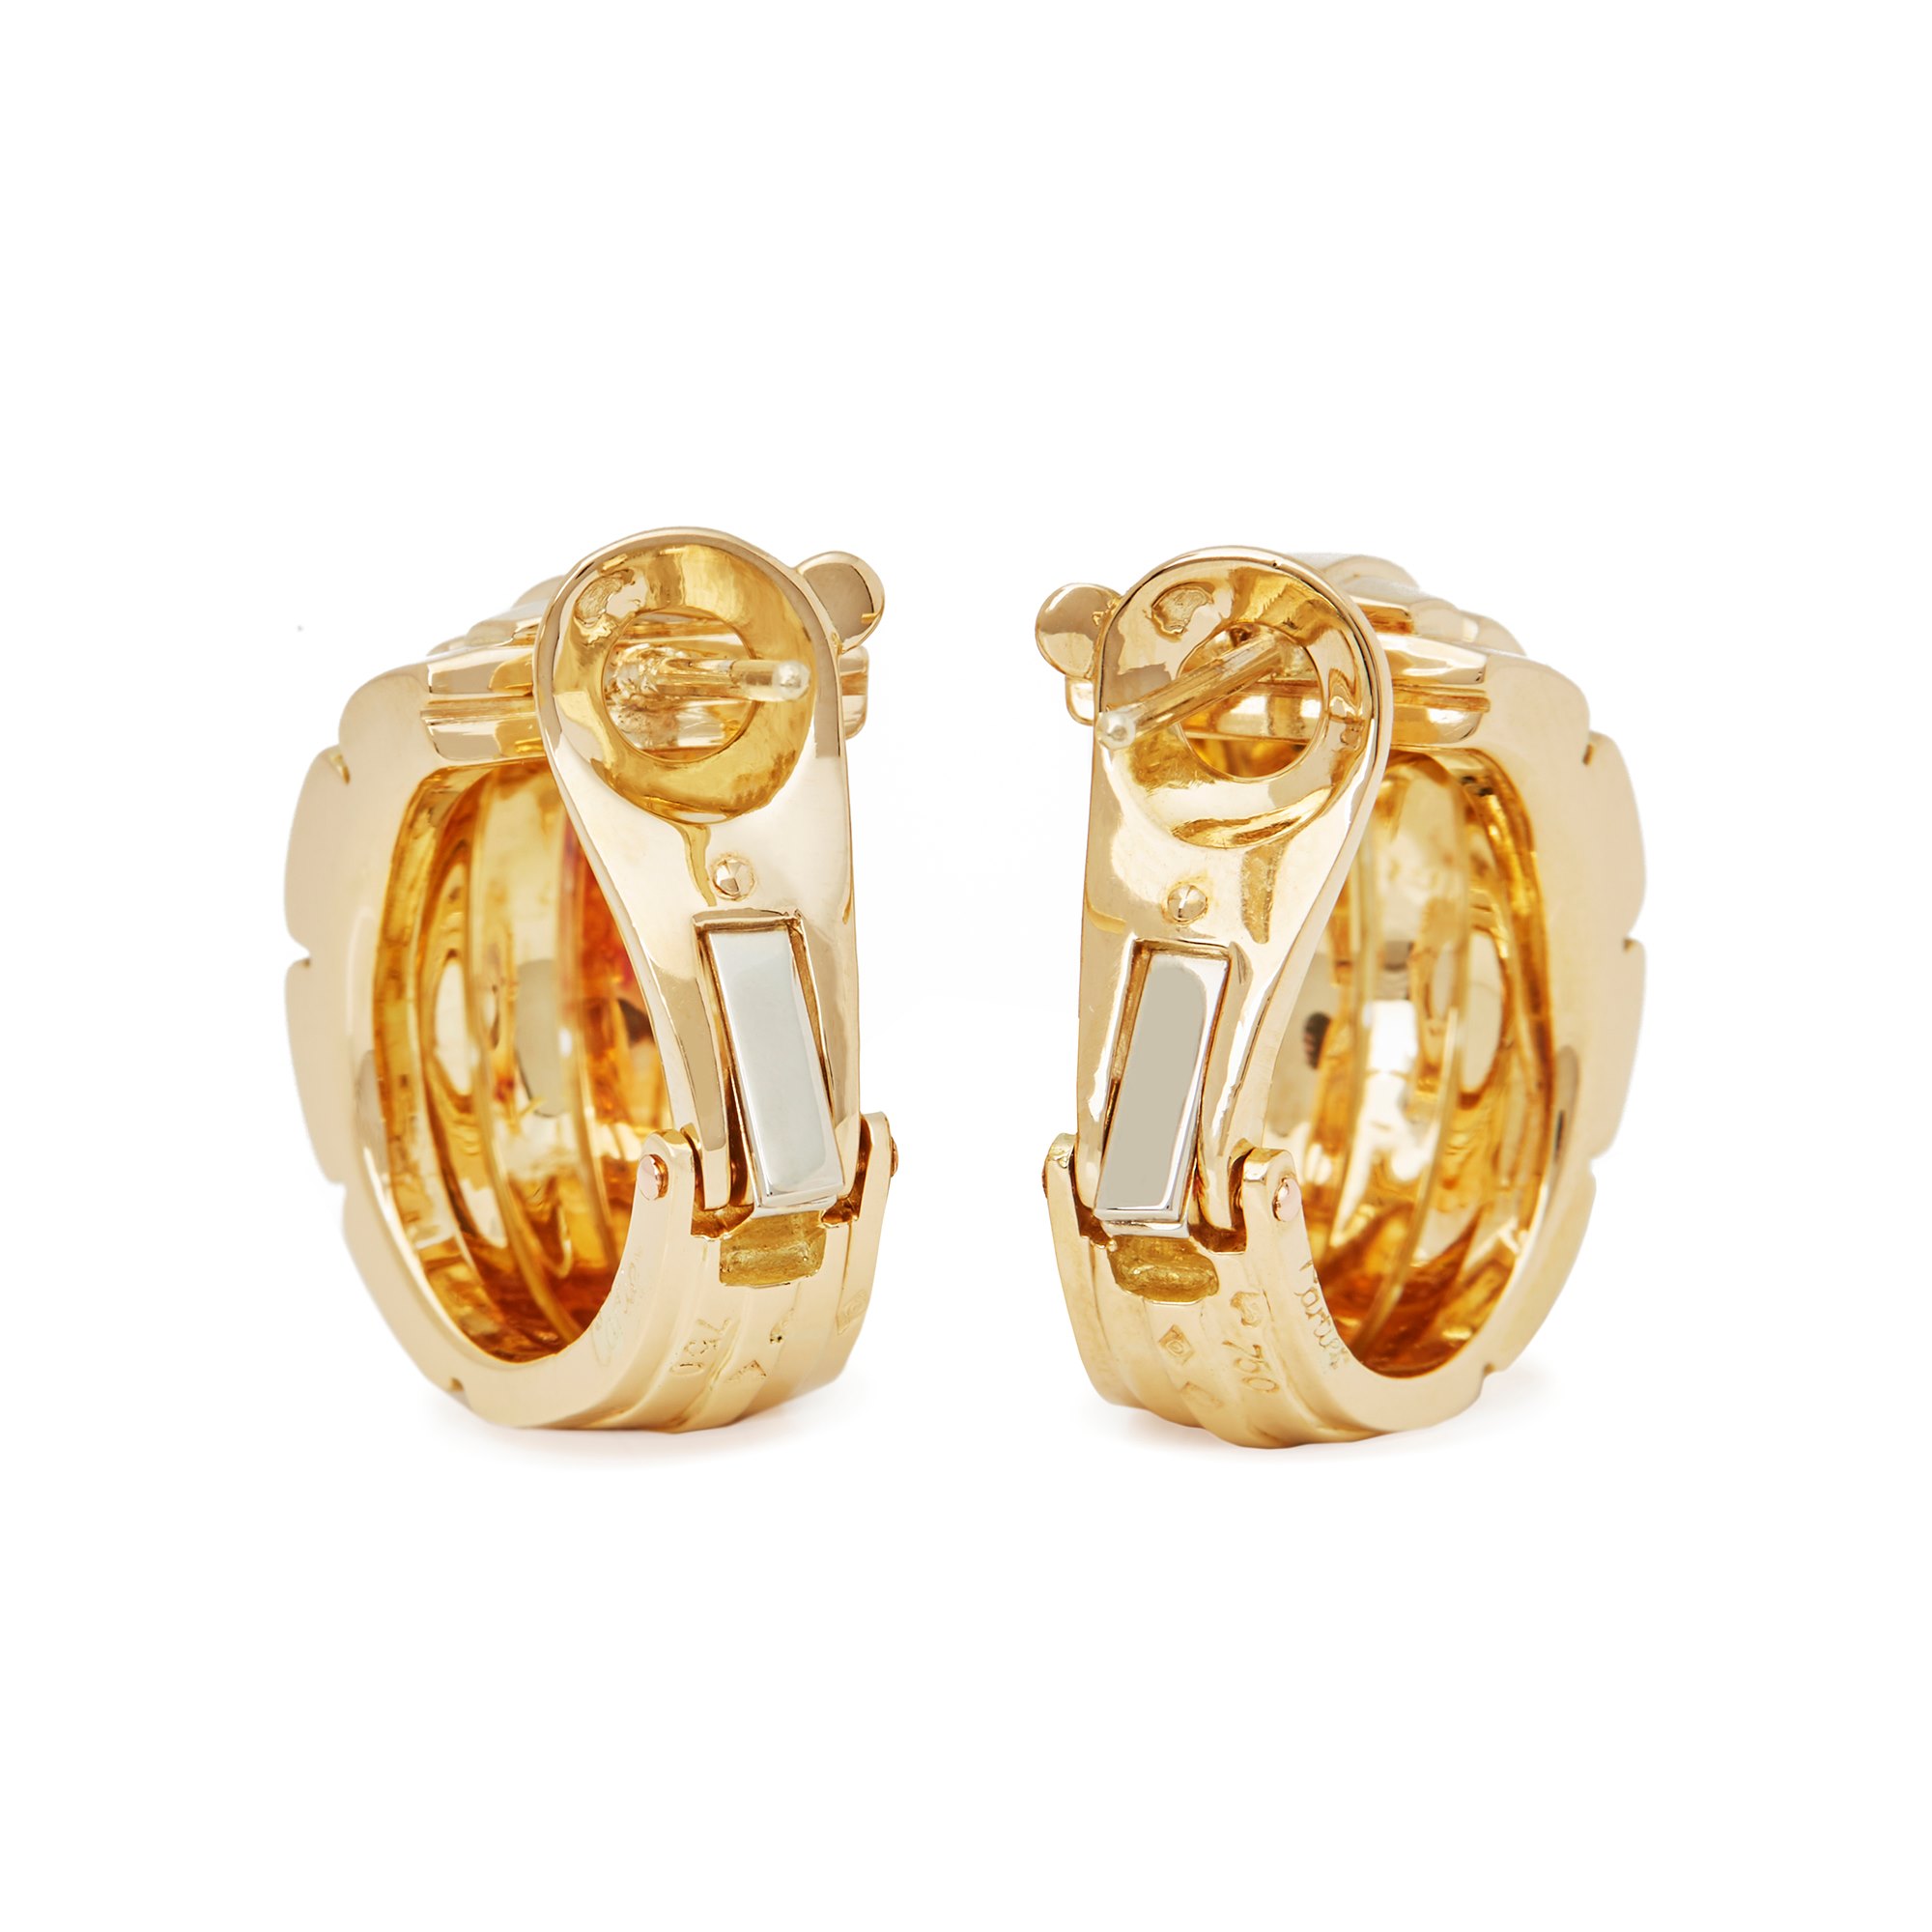 Cartier 18k Yellow Gold Maillon Panthère Earrings